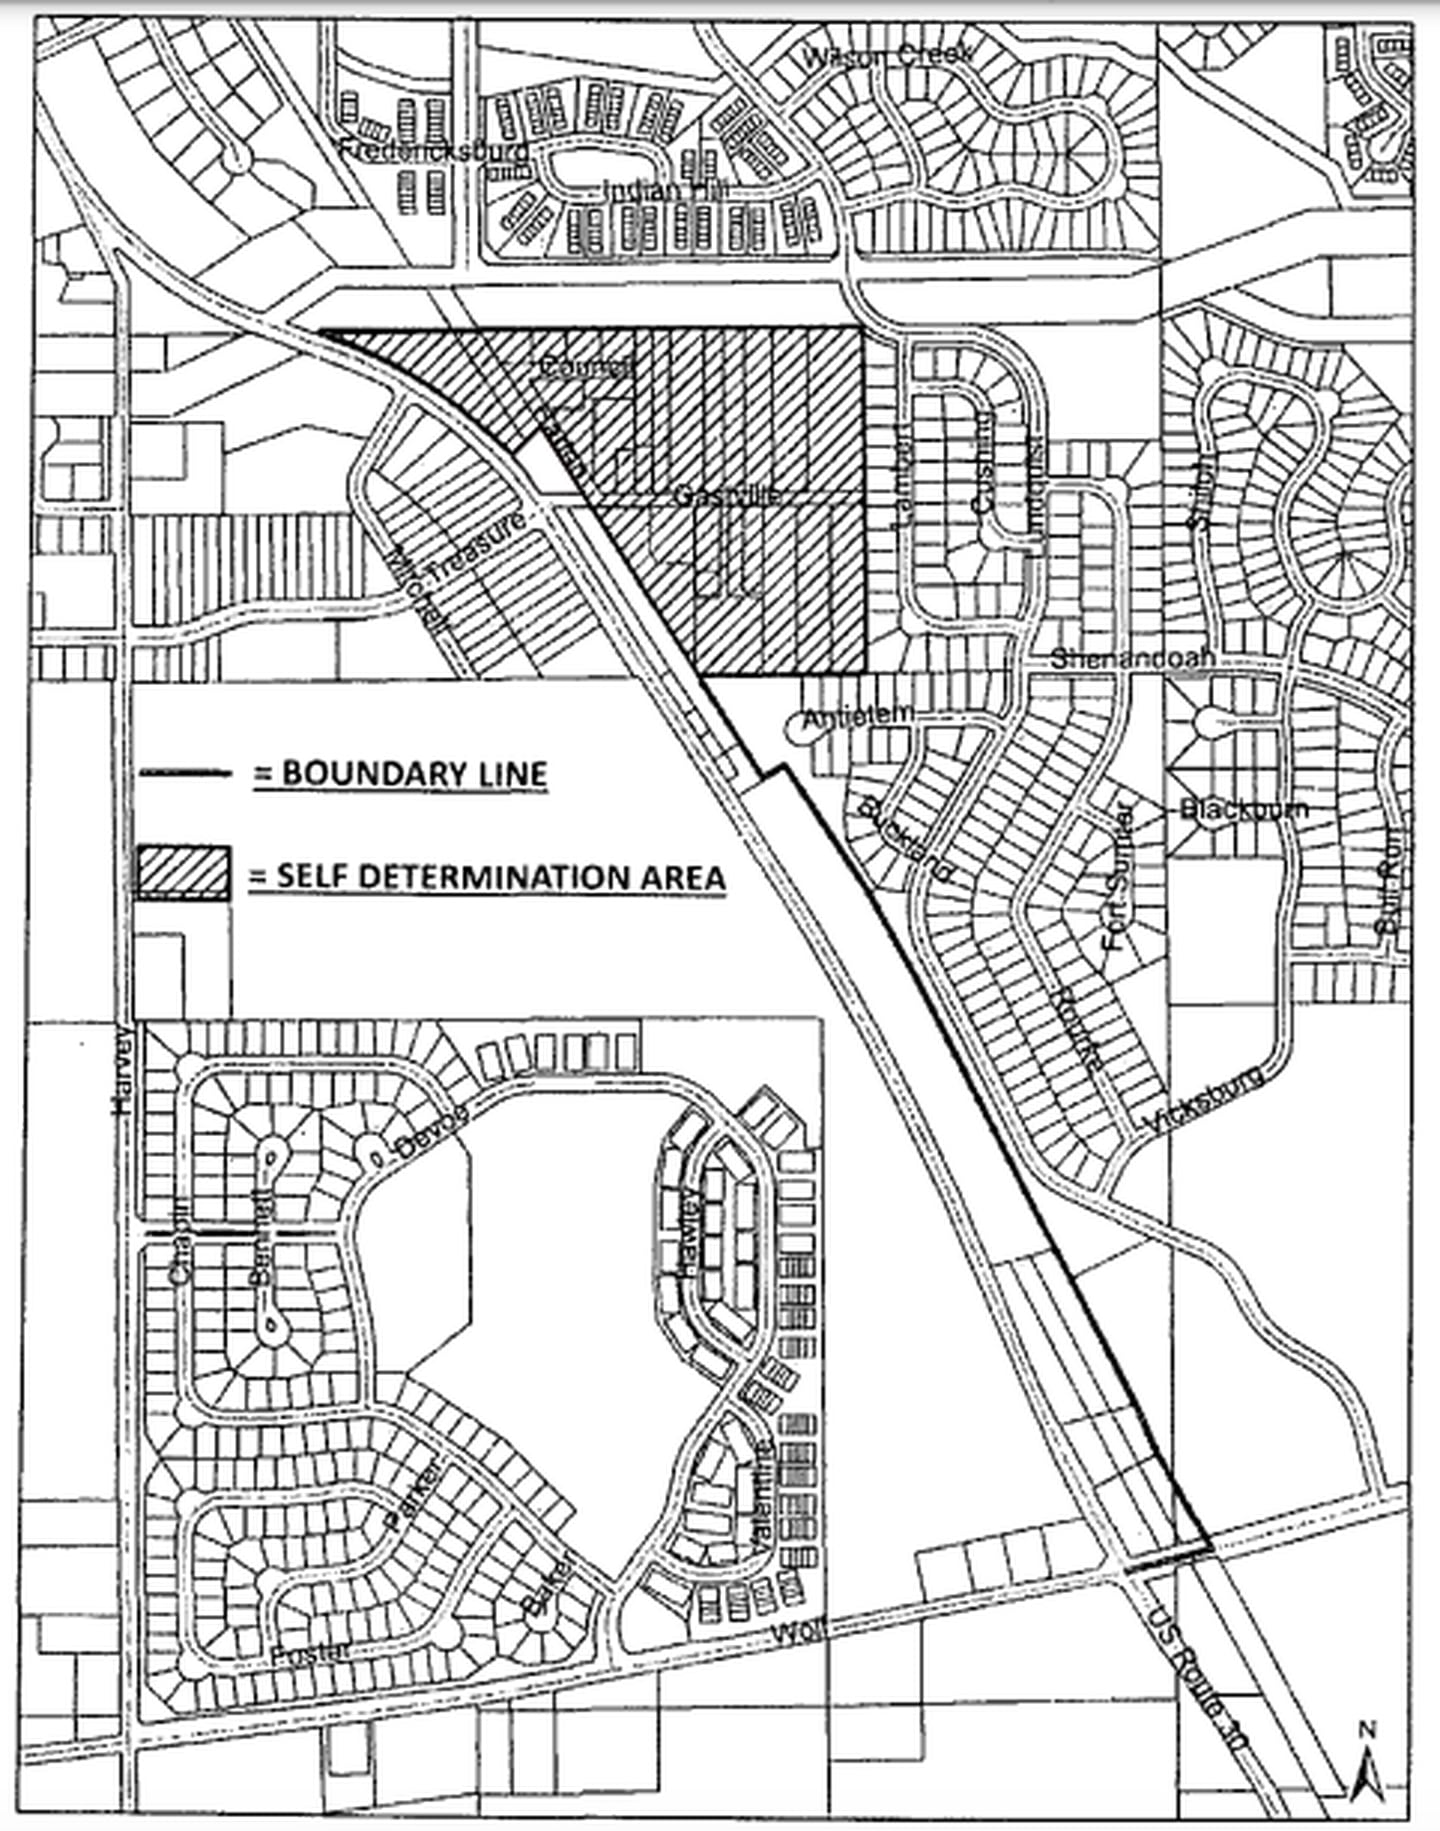 Map of the boundary agreement between the City of Aurora and the Village of Oswego for Route 30 and the future 95th Street.